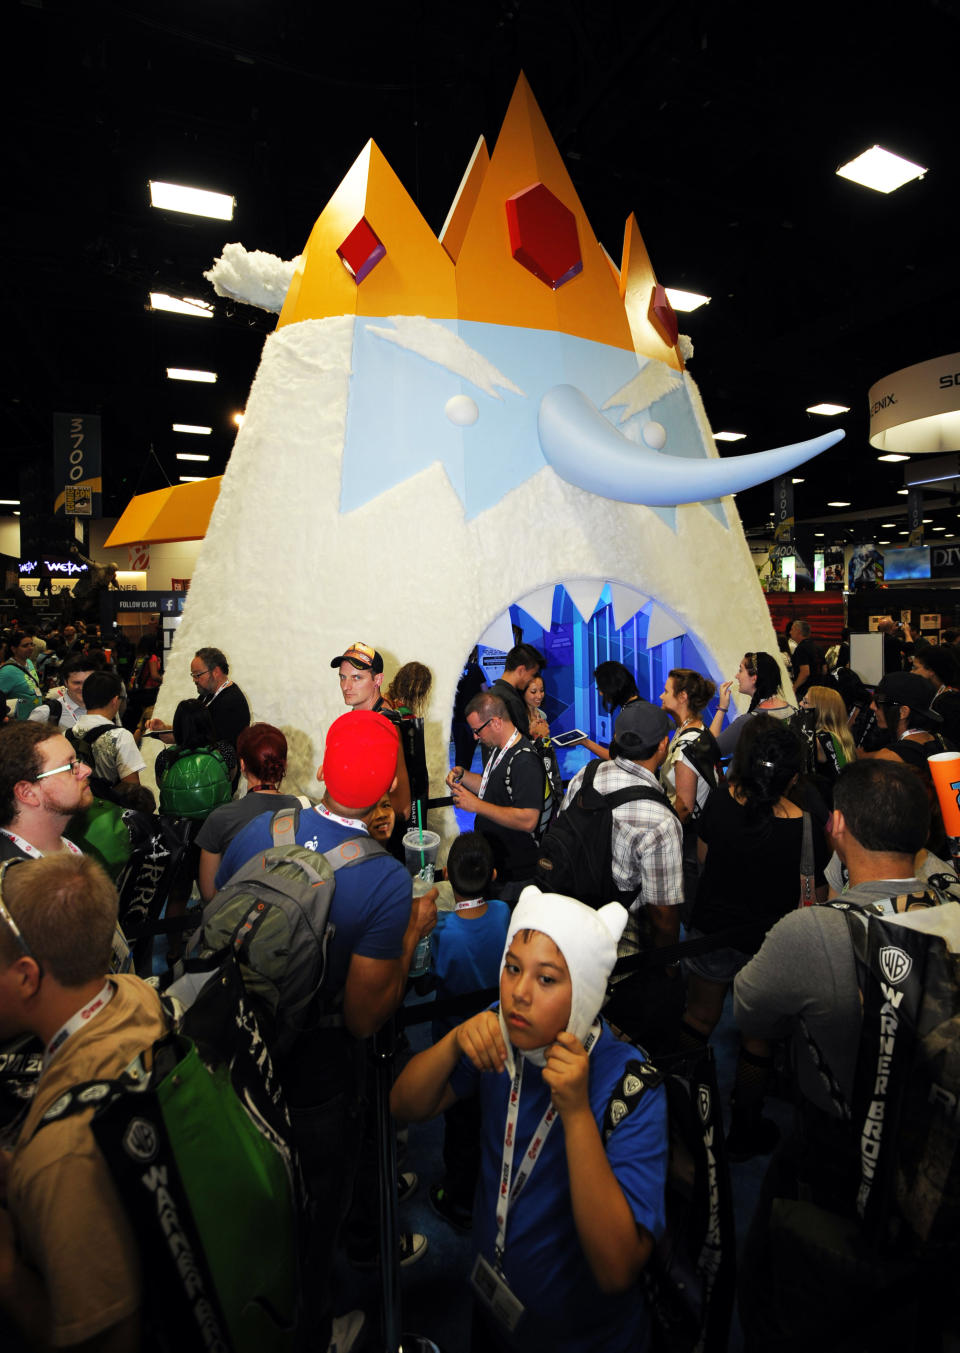 In this July 17, 2013, file photo, fans wait to walk through a huge "Adventure Time" Ice King character at the Cartoon Network booth at the 2013 Comic-Con International Convention in San Diego. Although traditional comic book characters still play a central role at conventions, television characters like Ice King have also become hugely popular. (Photo by Denis Poroy/Invision/AP, File)